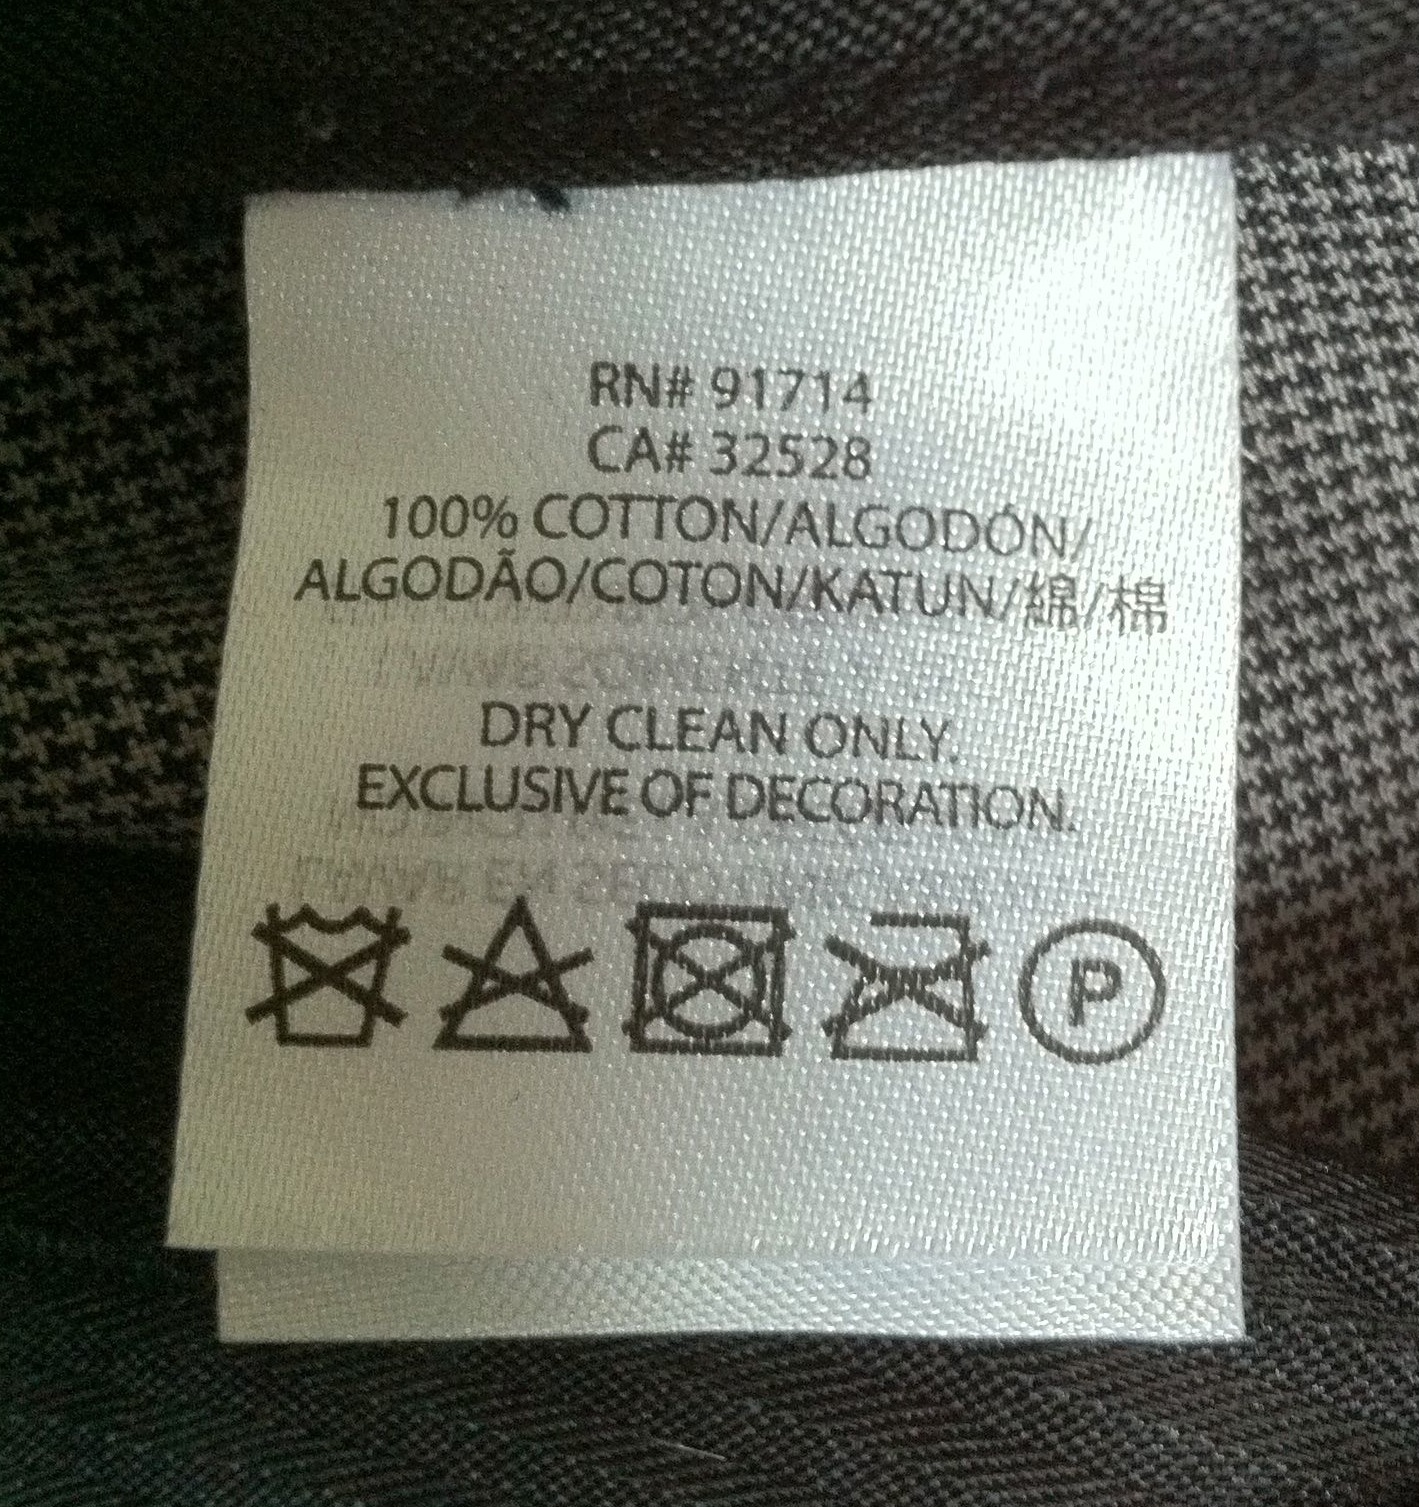 Do I Really Have To Dry Clean Nylon And Rayon Fabric 41